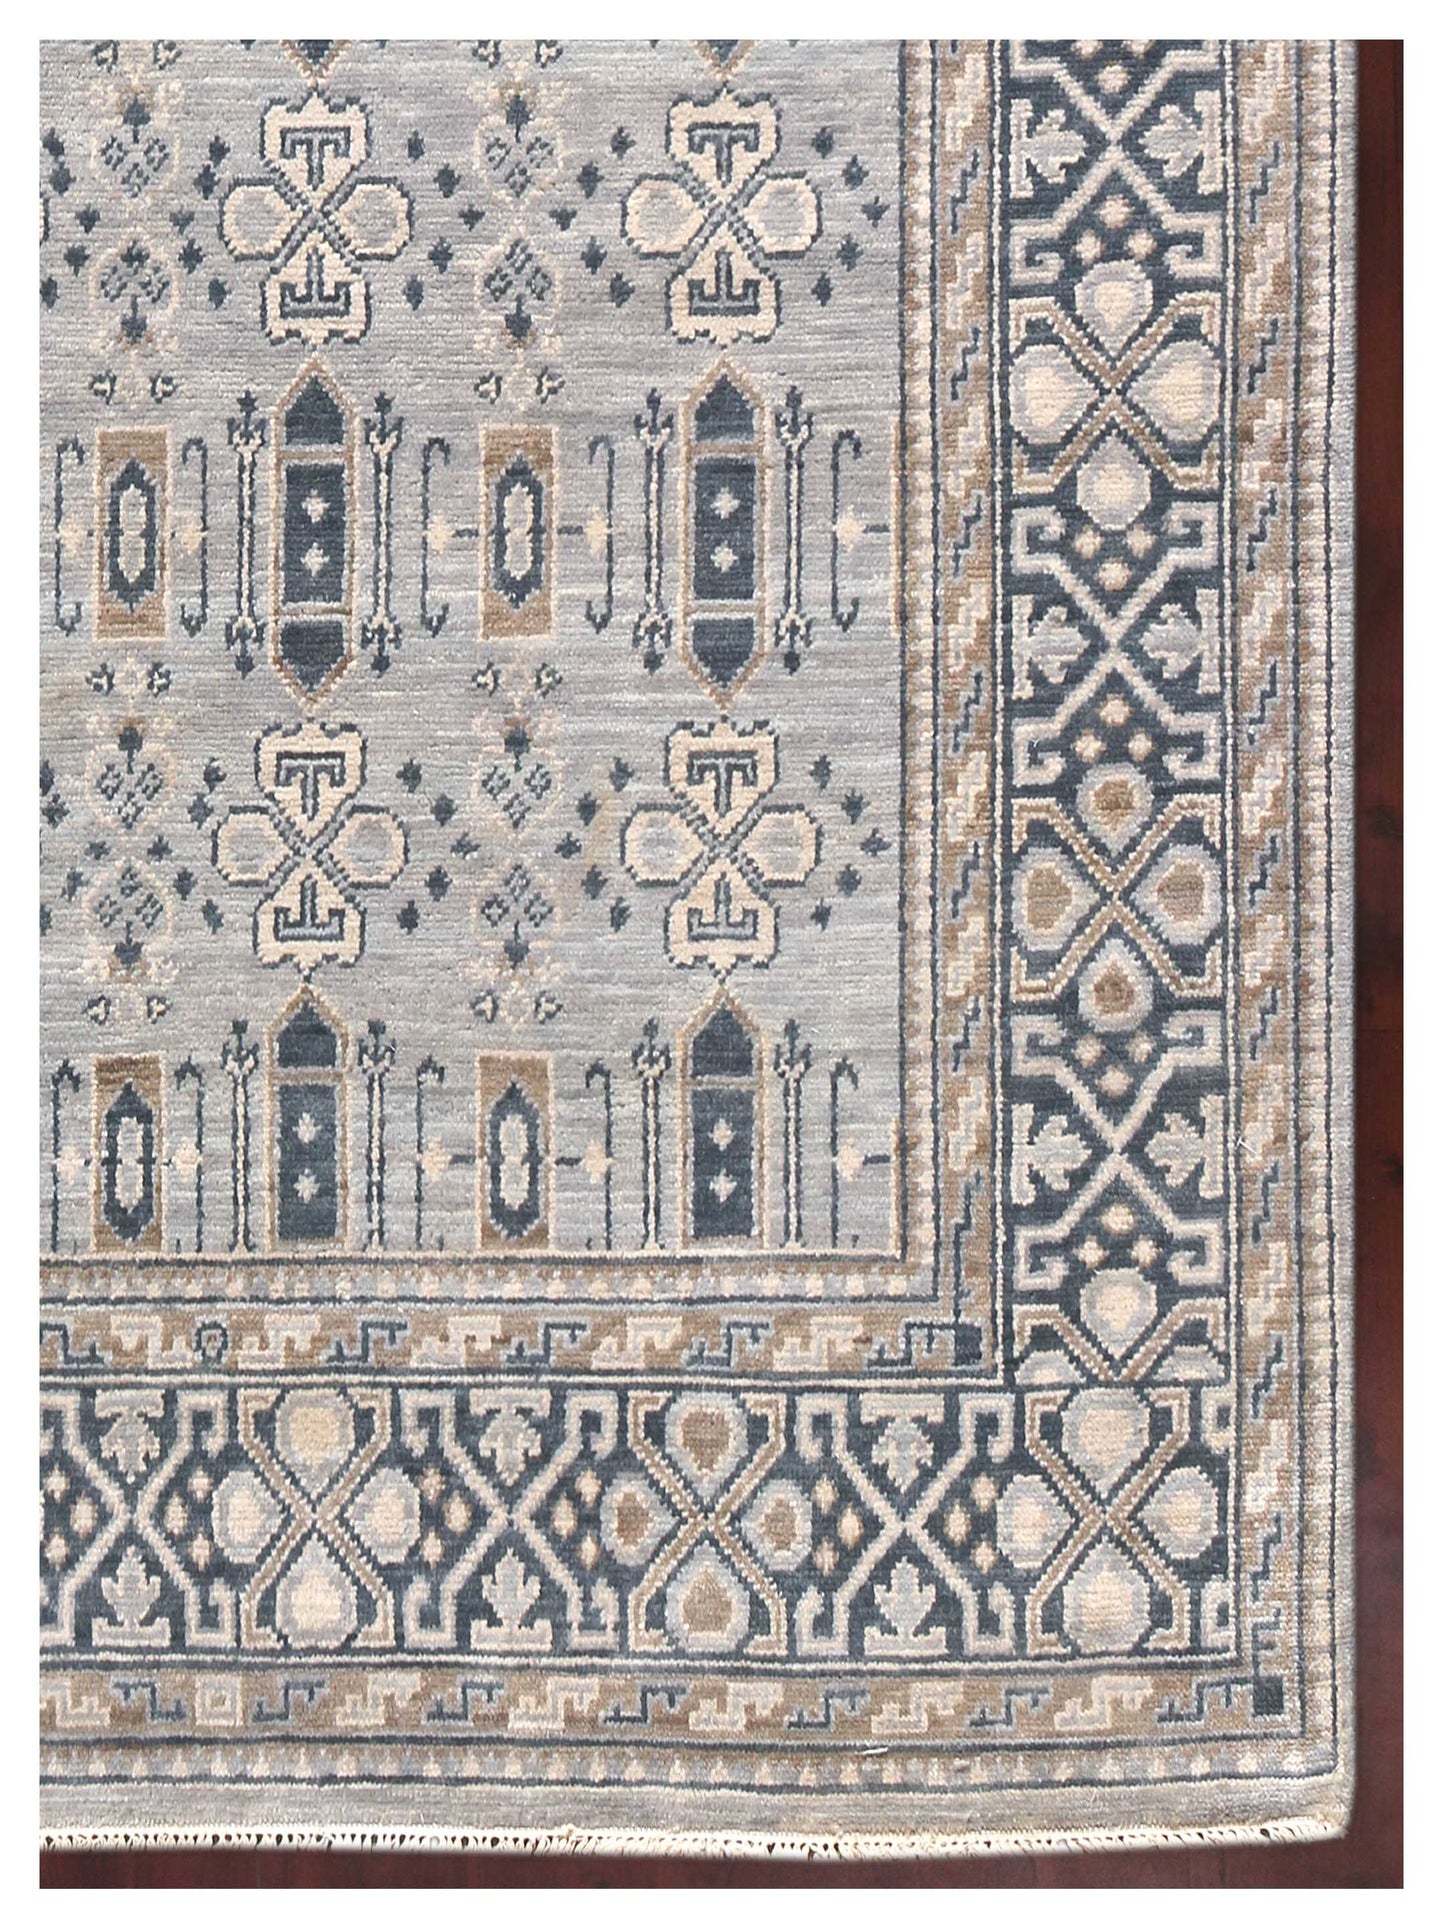 Limited BALLINA BA-433 BLUE  Traditional Knotted Rug